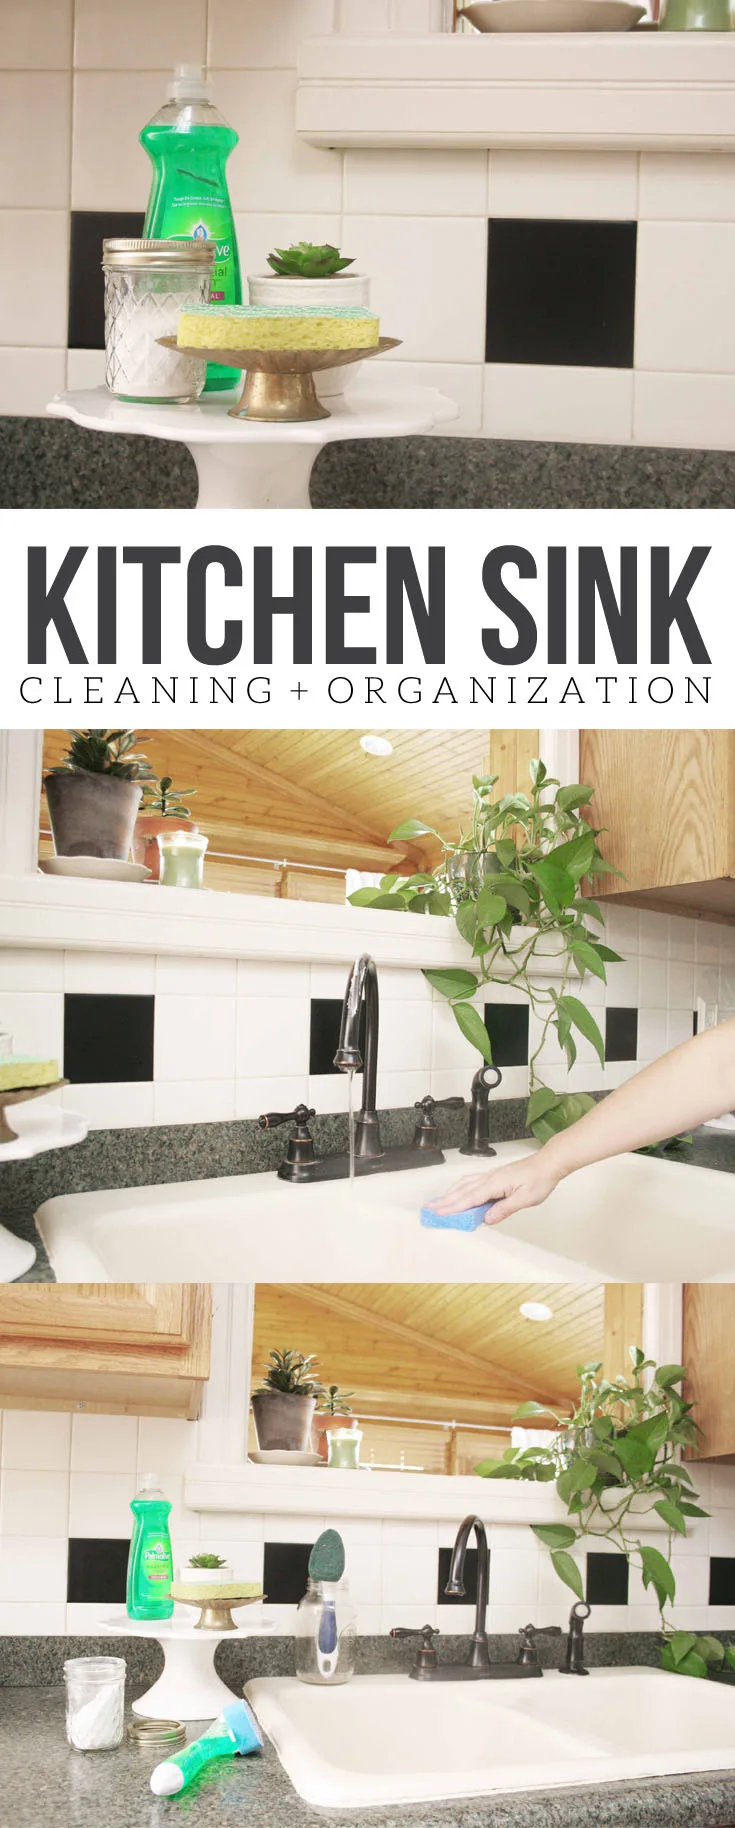 How to keep the Kitchen Sink Clean and Organized, Kitchen Sink Cleaning, Kitchen Sink Organization, Farmhouse Style Faucet, Oil Rubbed Bronze, Gooseneck, Farmhouse Sink #farmhousestyle #farmhouse #kitchen